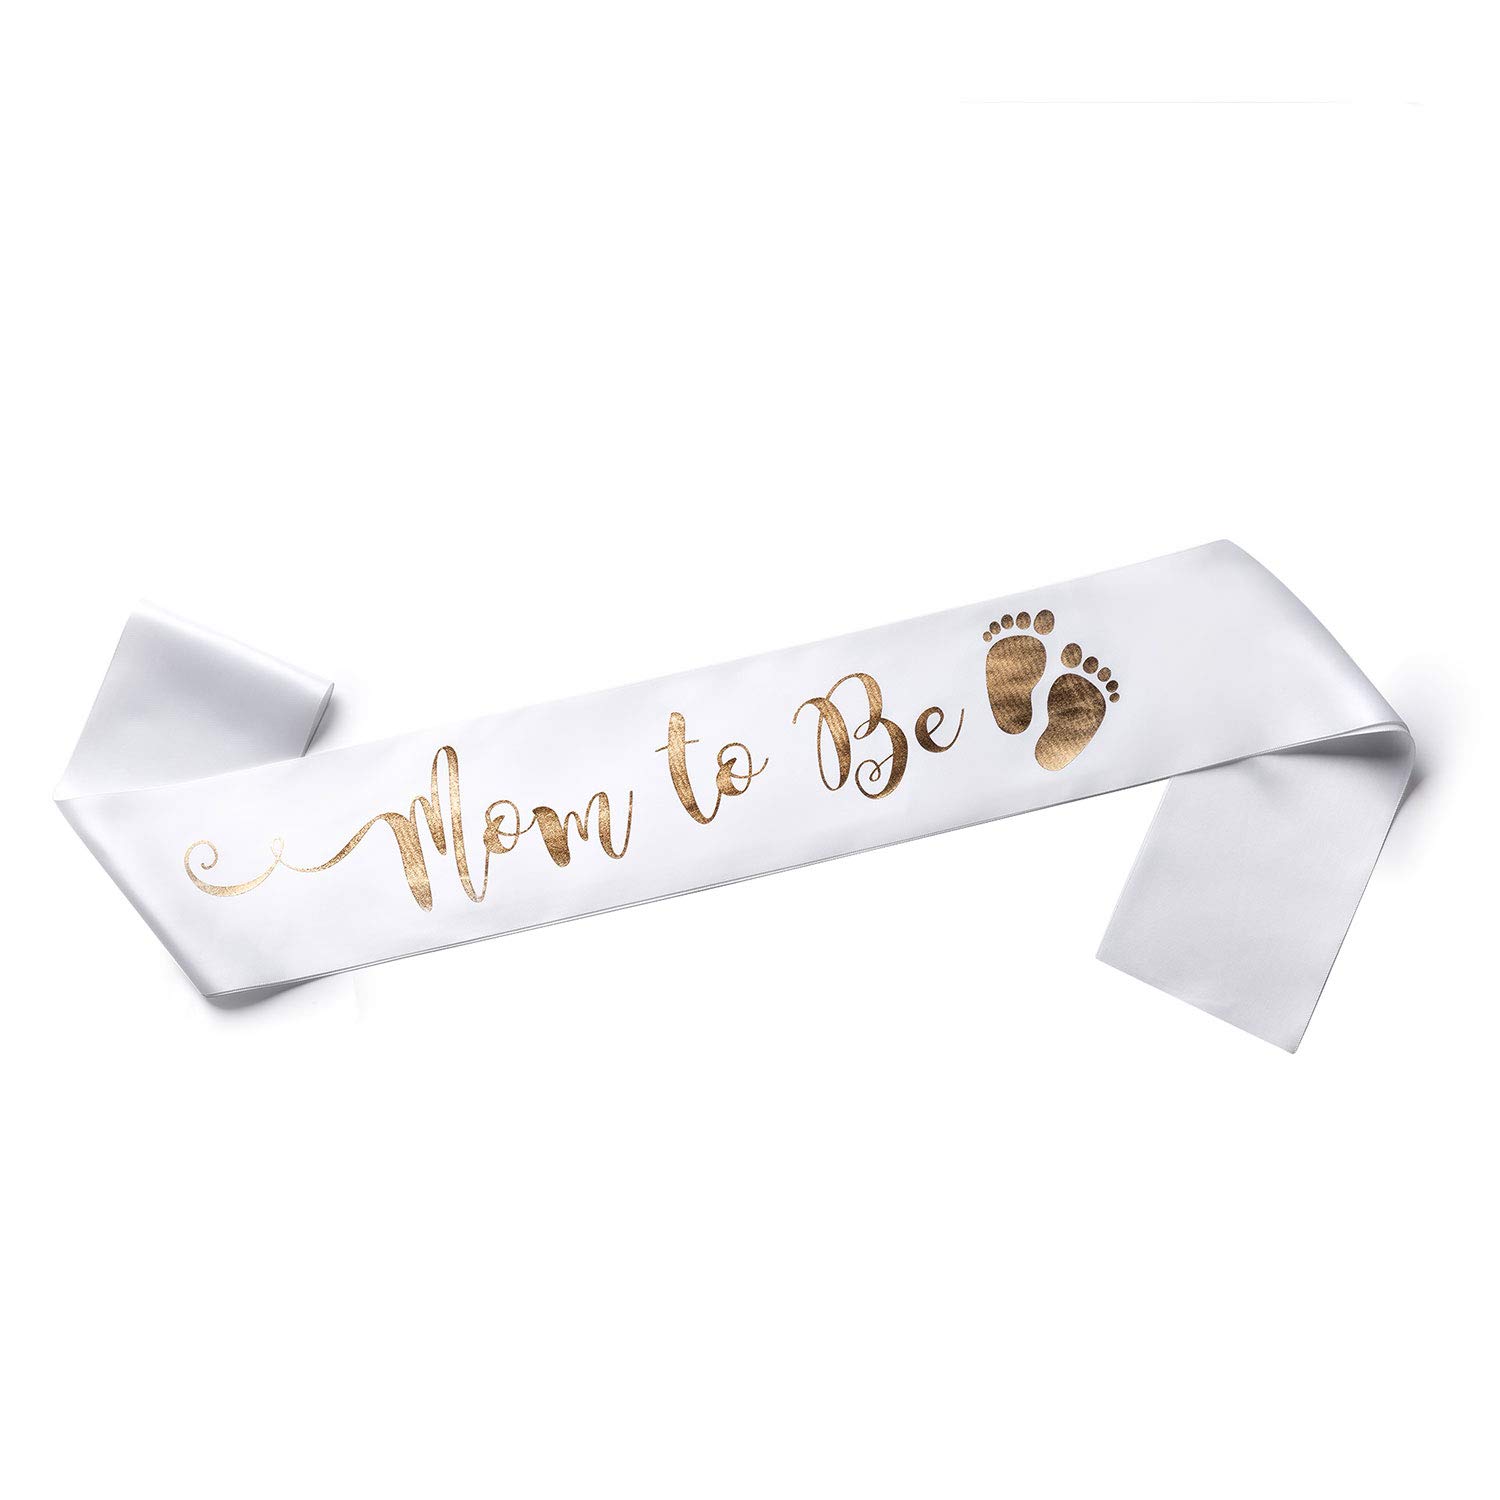 OLILLY Perfect White and Gold Mom to Be Sash - Enjoy Your Baby Shower (White and Gold)